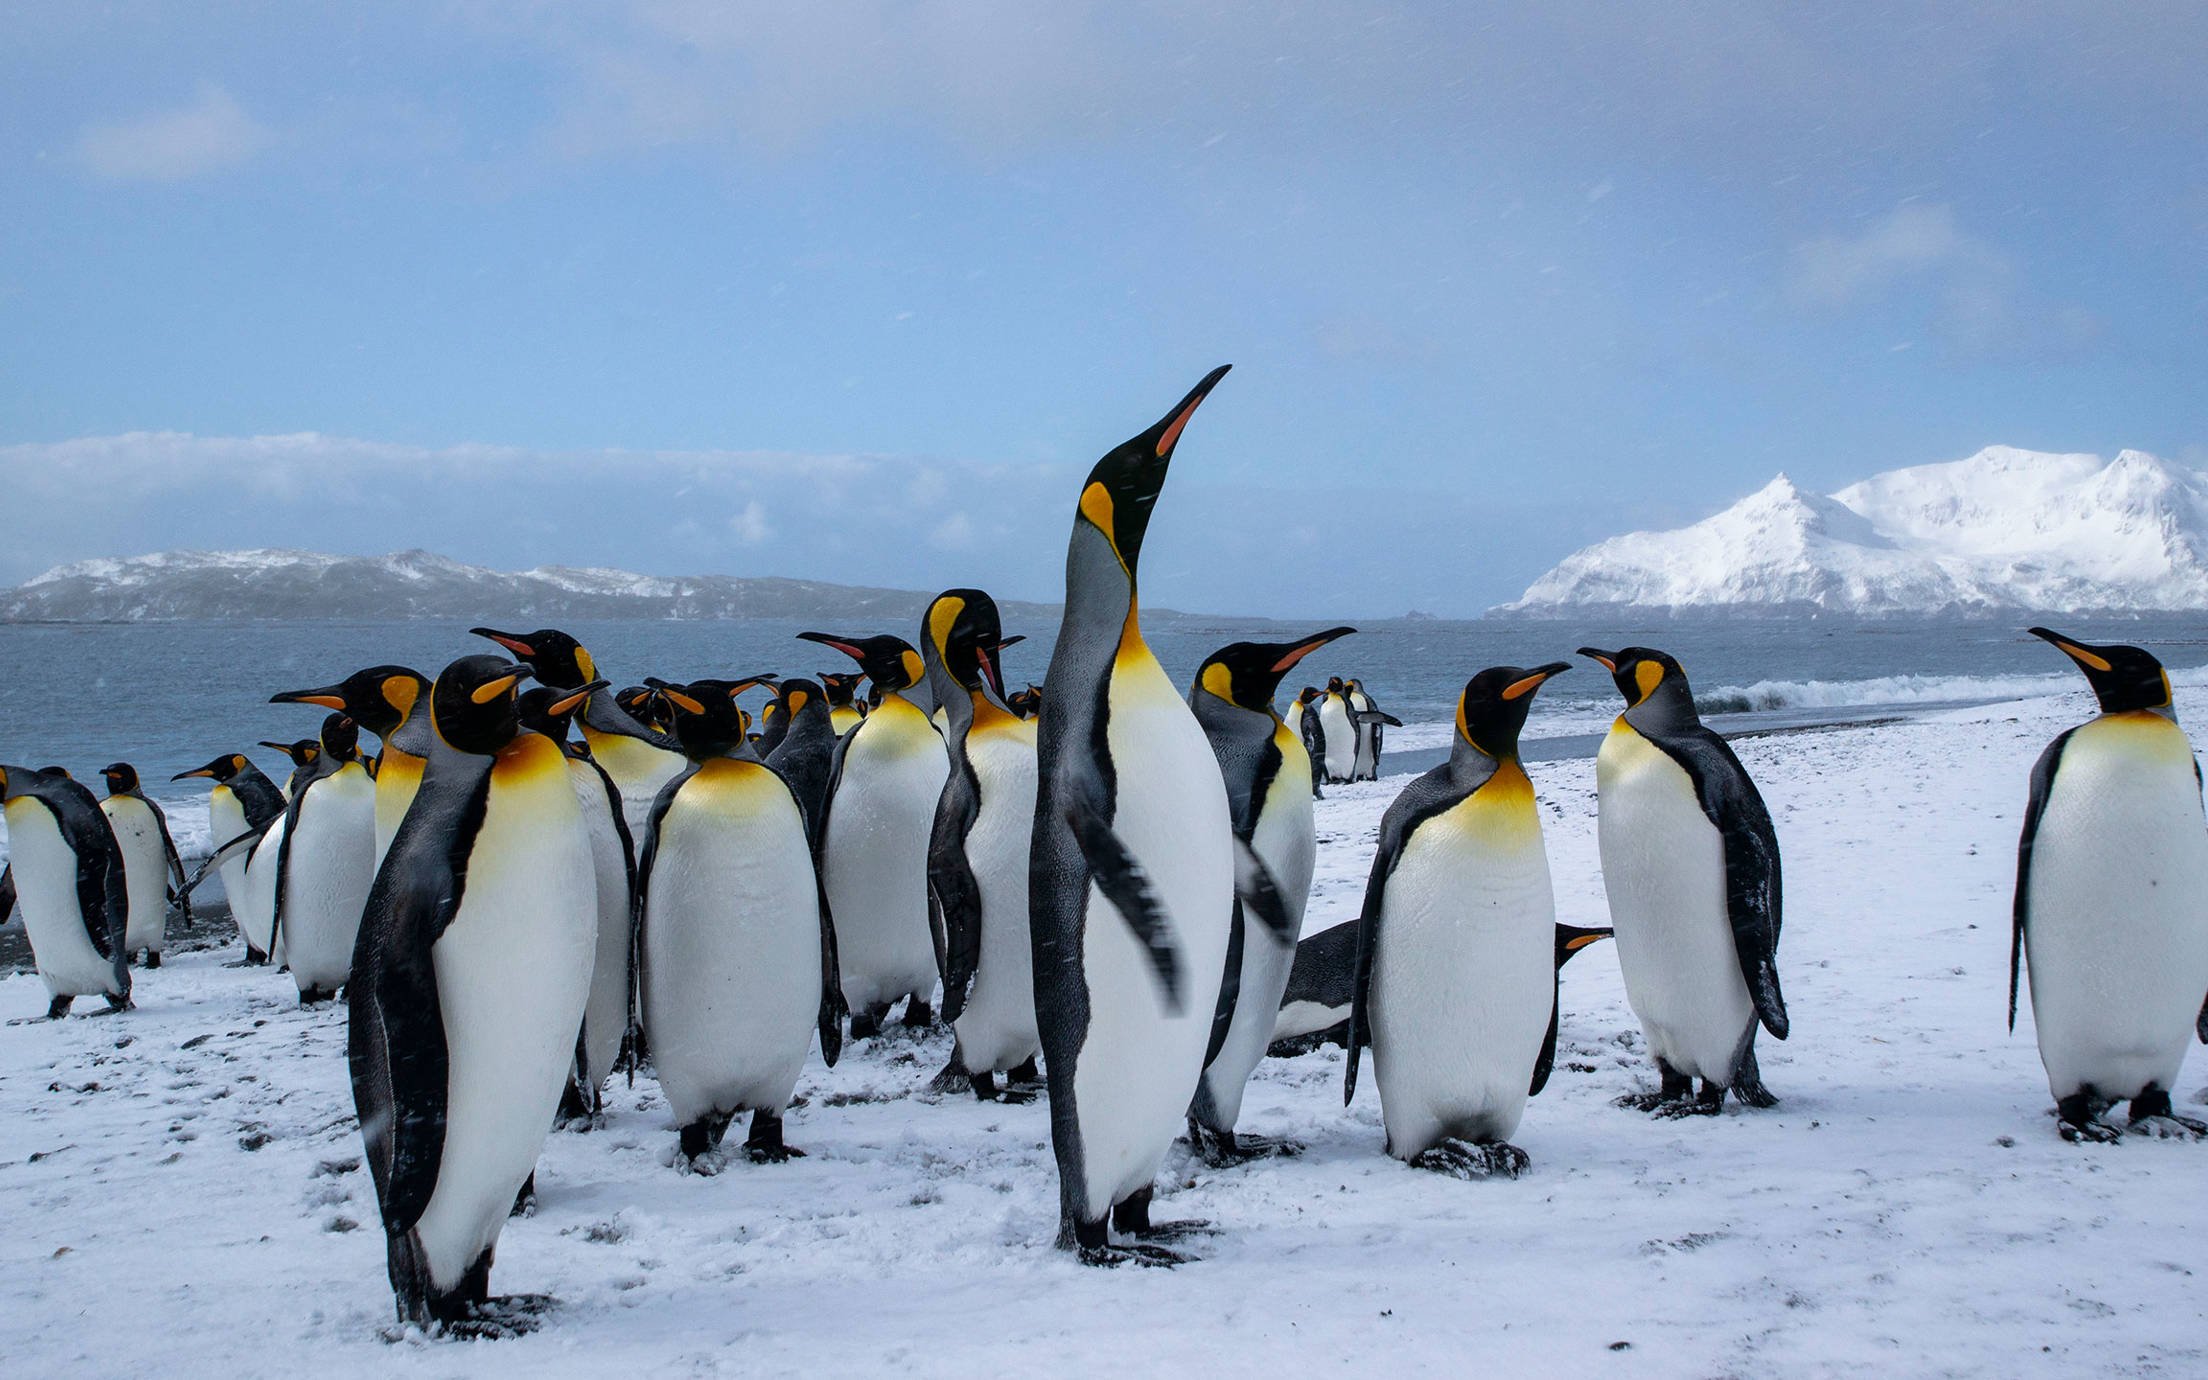 The penguin is one of the toughest creatures in the world and is a sociable bird. It is associated with Jotun in what we call “The penguin spirit”.